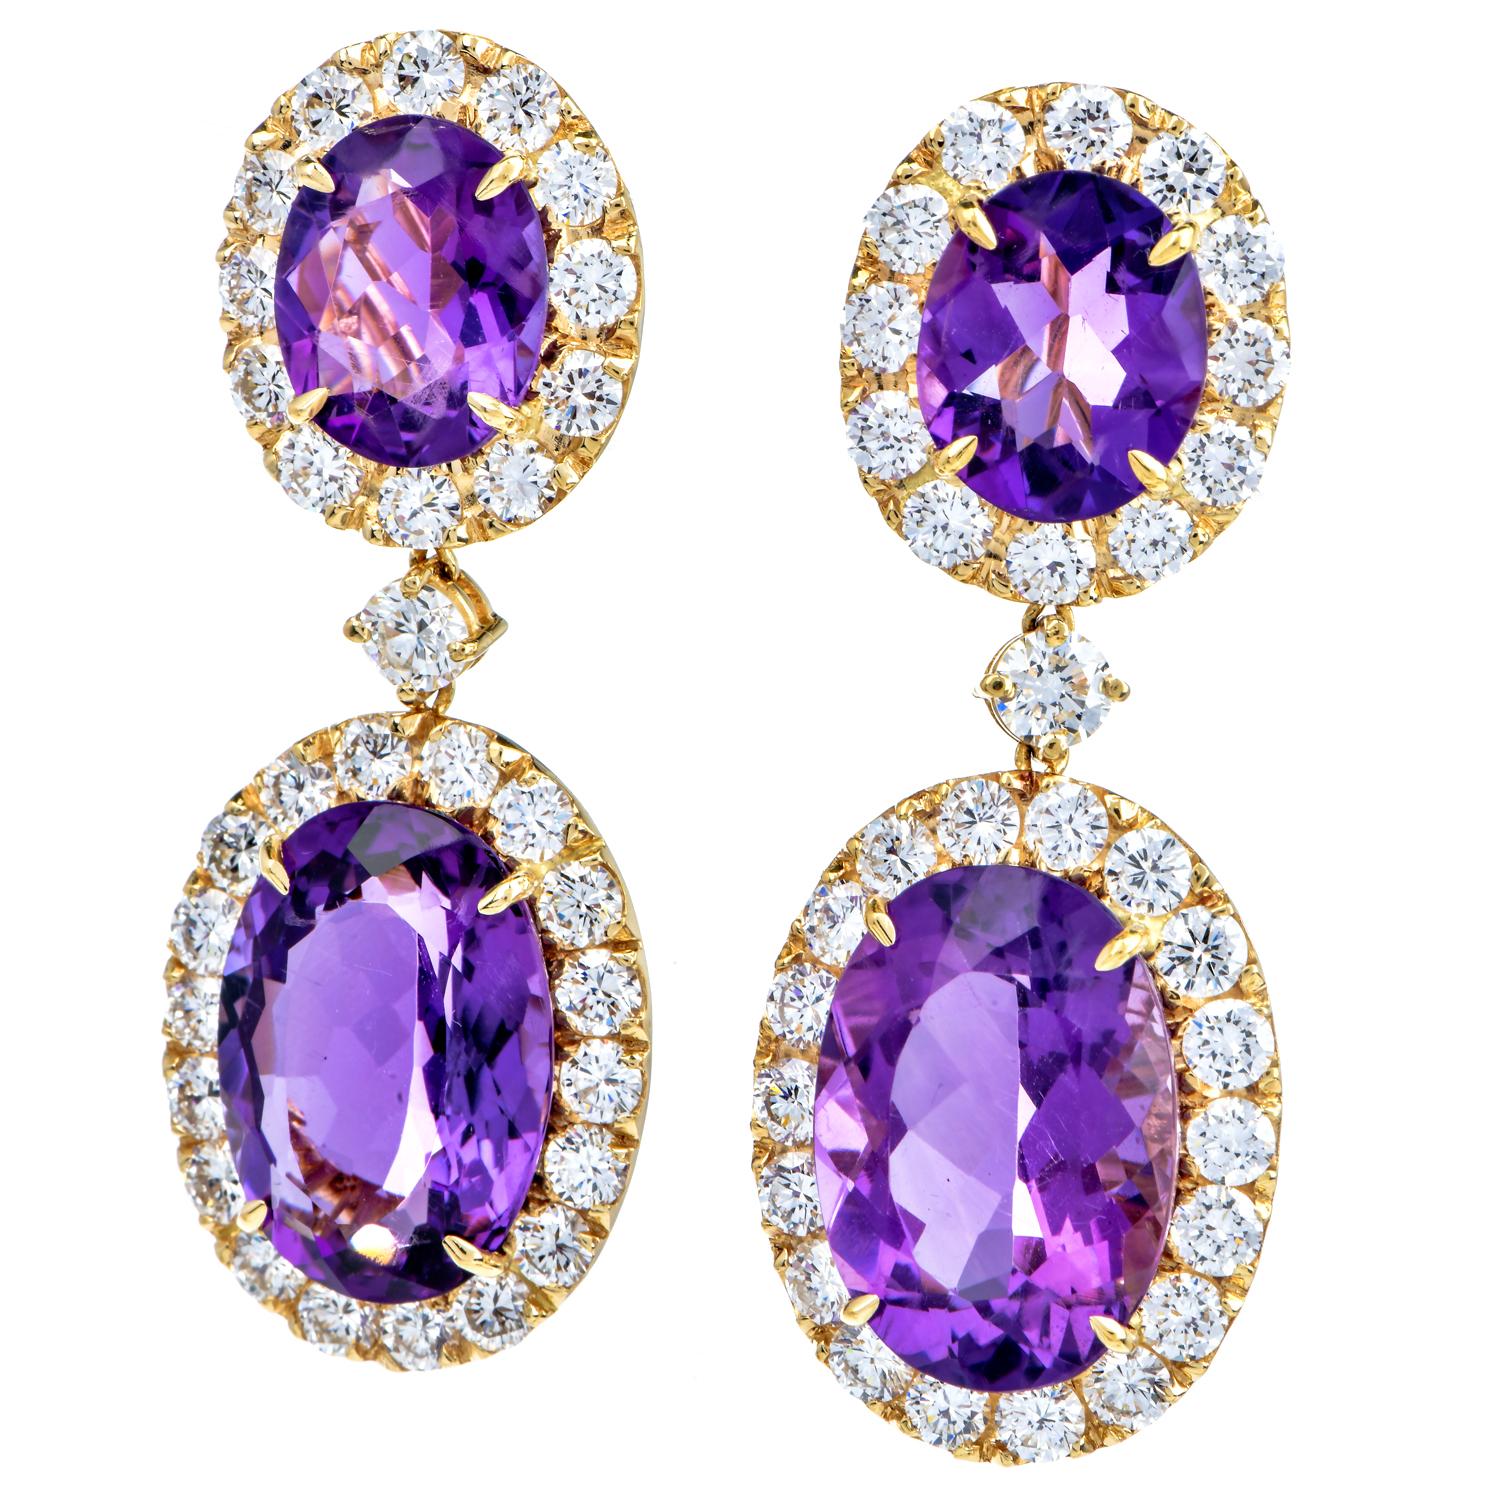 An exquisite Vivid Fine Amethyst surrounded by a diamond halo is a timeless look impossible to ignore!

this glamorous pendant is crafted in solid 18K Yellow Gold.

Consists of an Oval-Cut 27.00 carats Amethyst prong set, surrounded by 20 round-cut